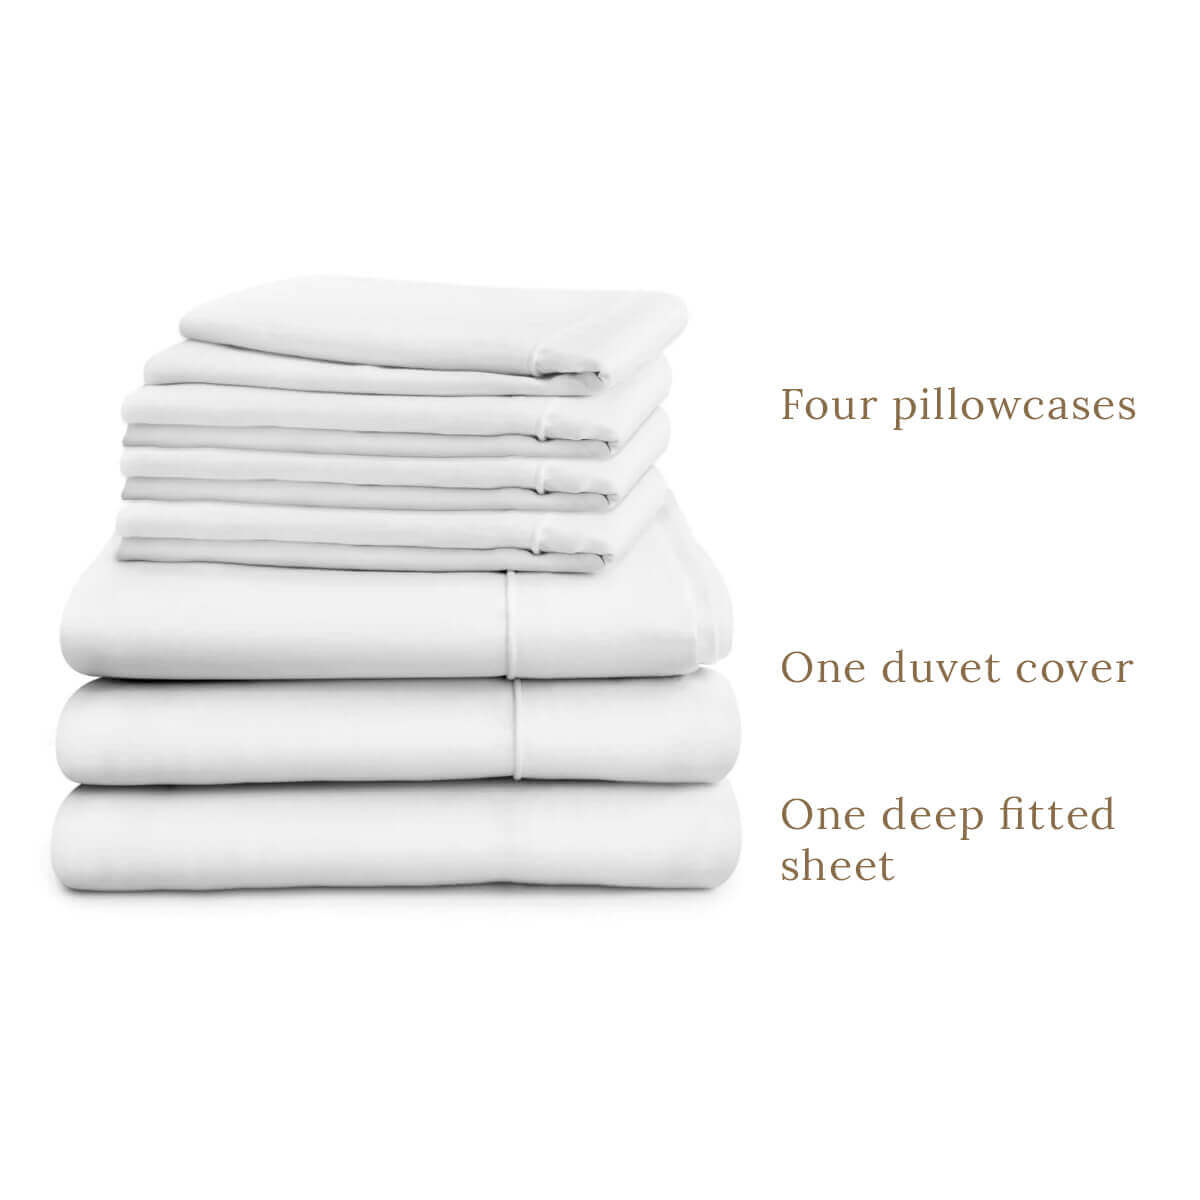 Egyptian Cotton 500 Thread Count Sateen Luxury Duvet Cover and 40cm Deep Fitted Sheet Set With Four Standard Pillowcases, Pure White - Hampton & Astley